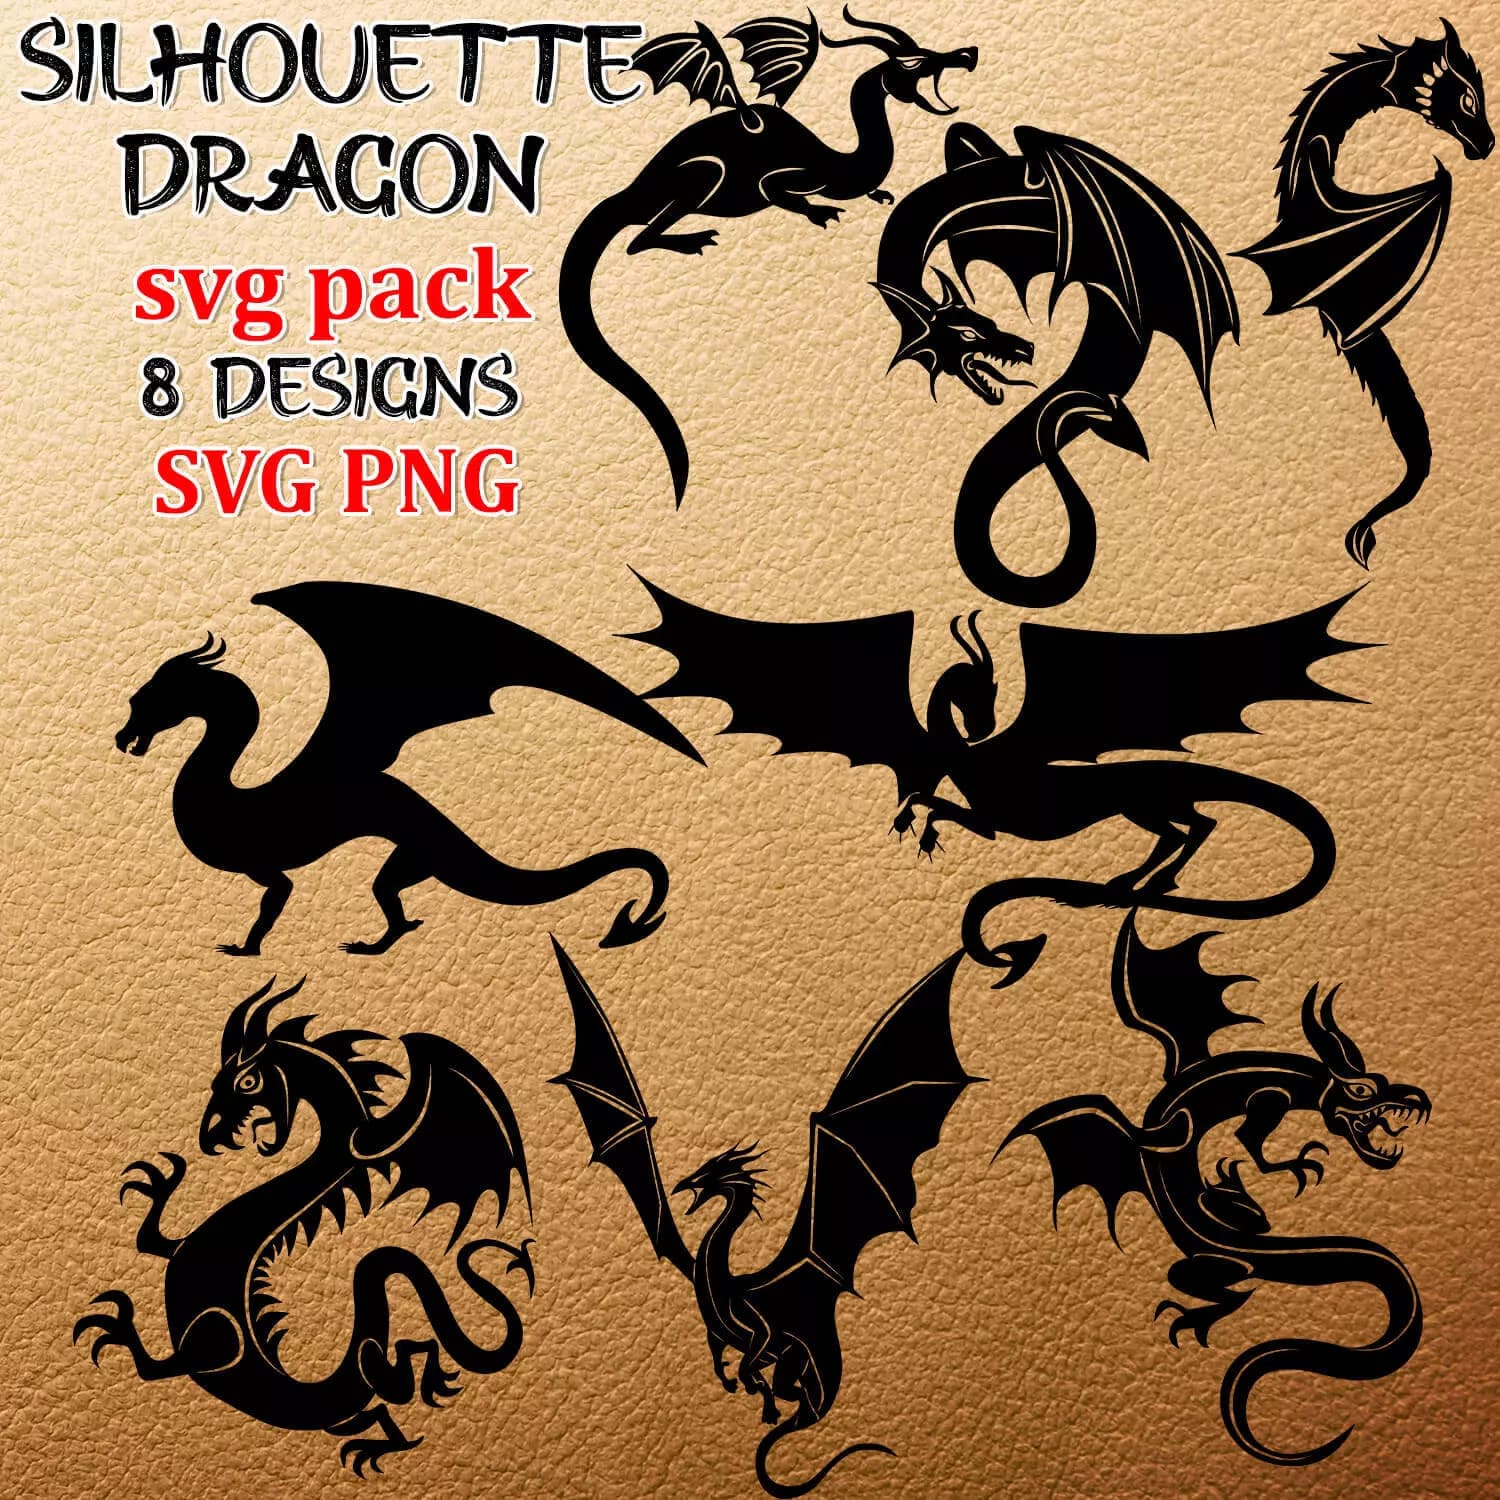 Silhouette Dragon SVG Preview image.